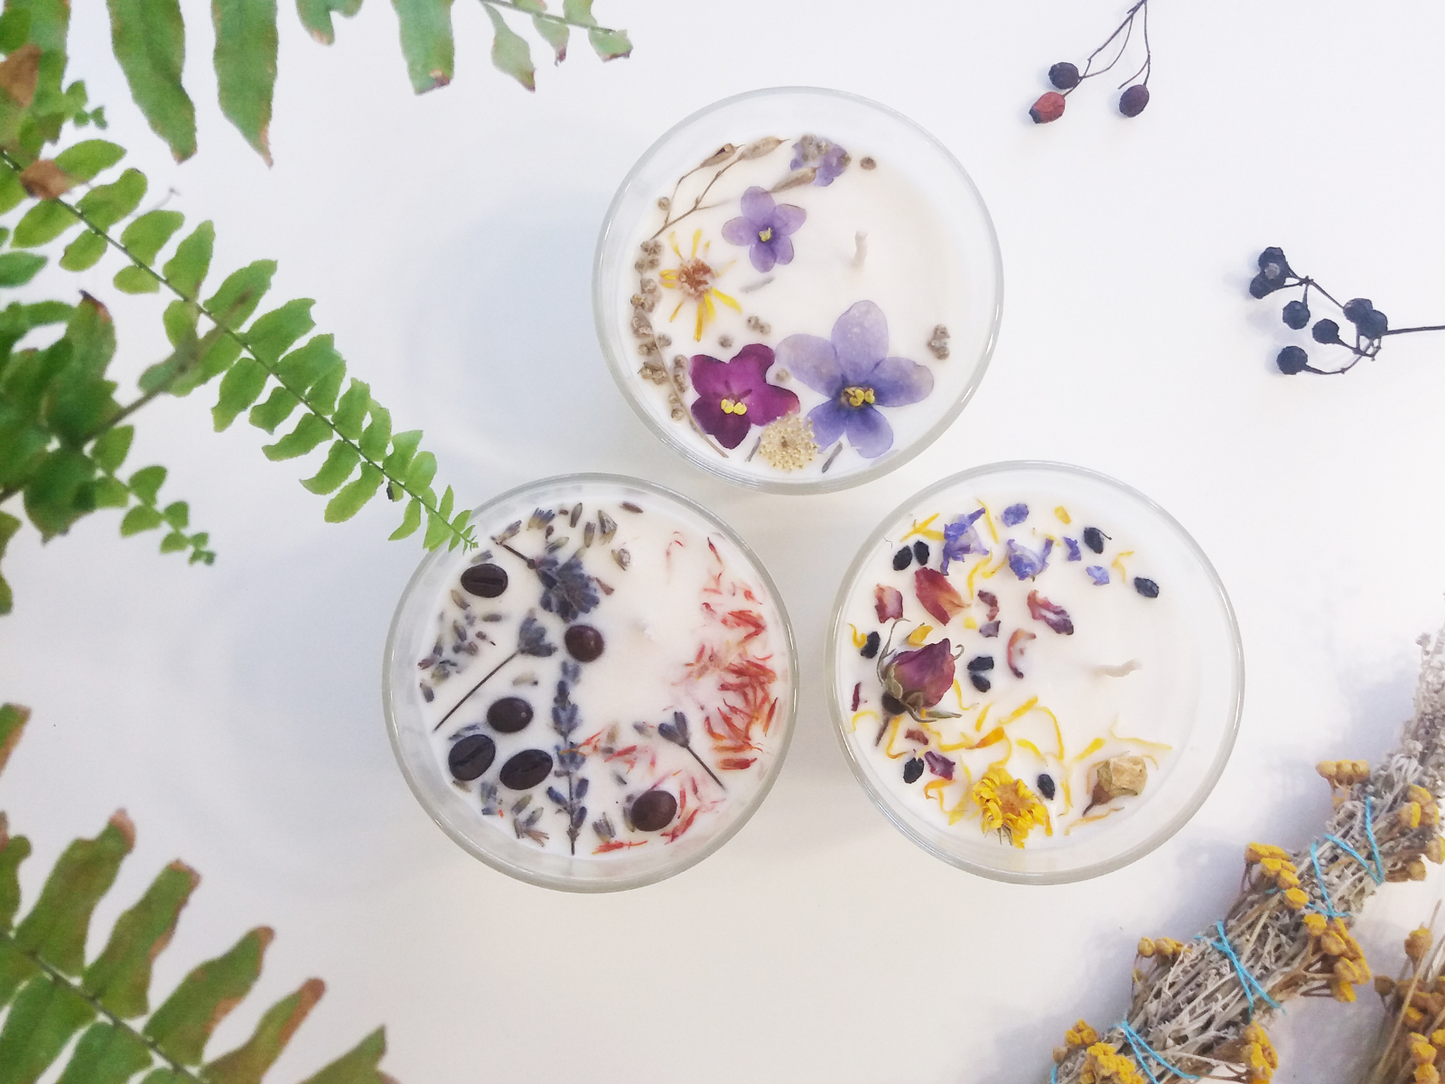 Children's Soy Candle Making Class: Crystals and Botanicals